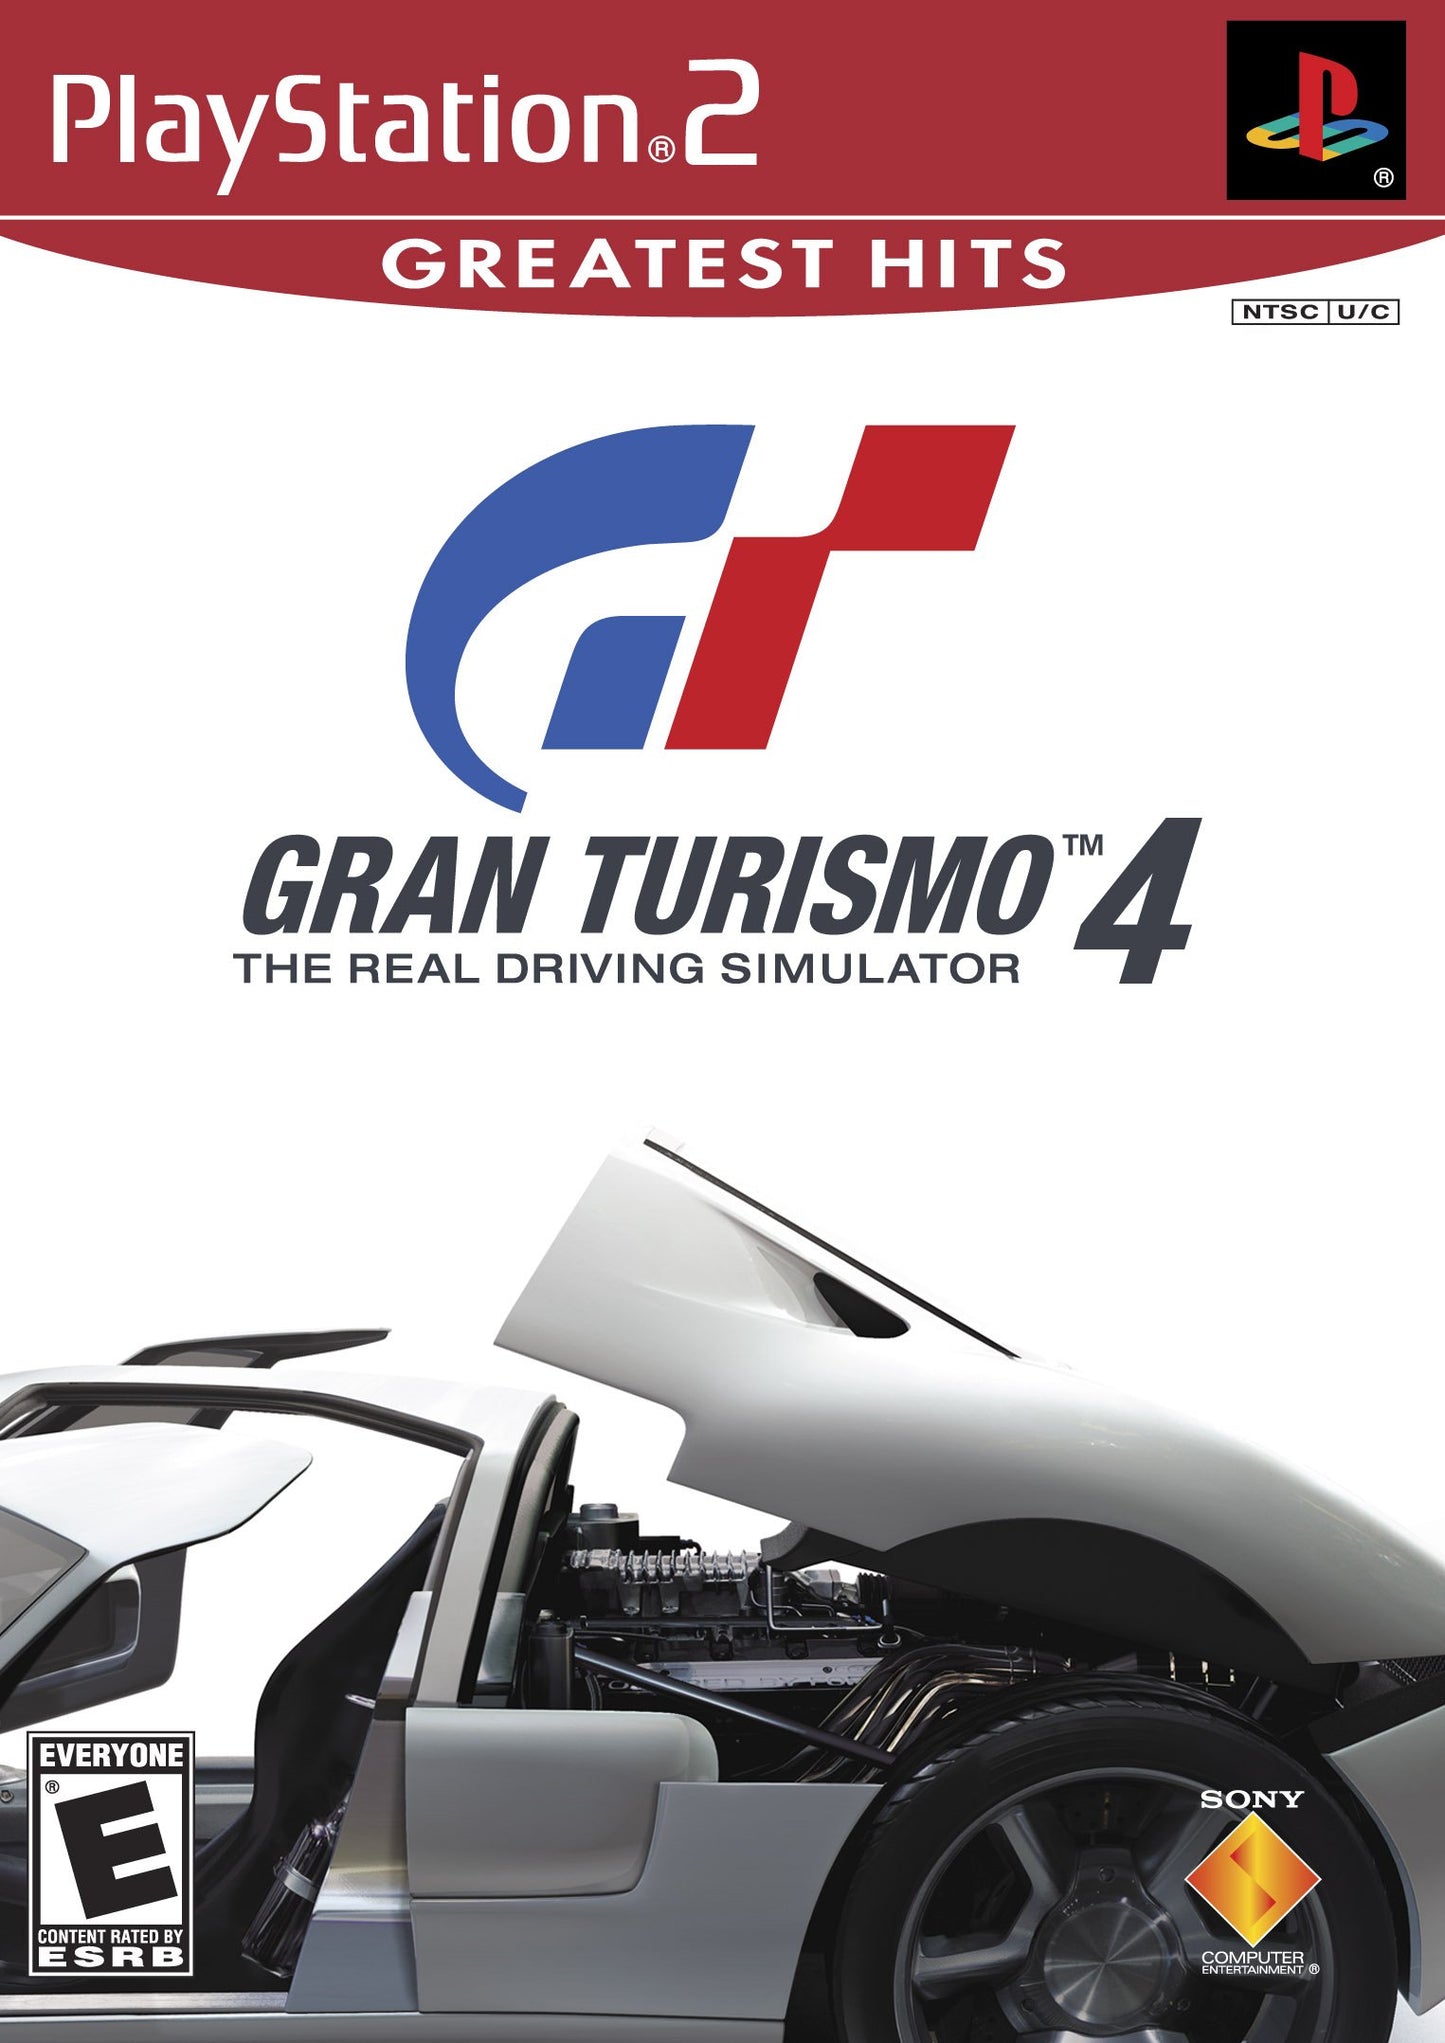 Grand Turismo 4 The Real Driving Simulator (Playstation 2 Disc)